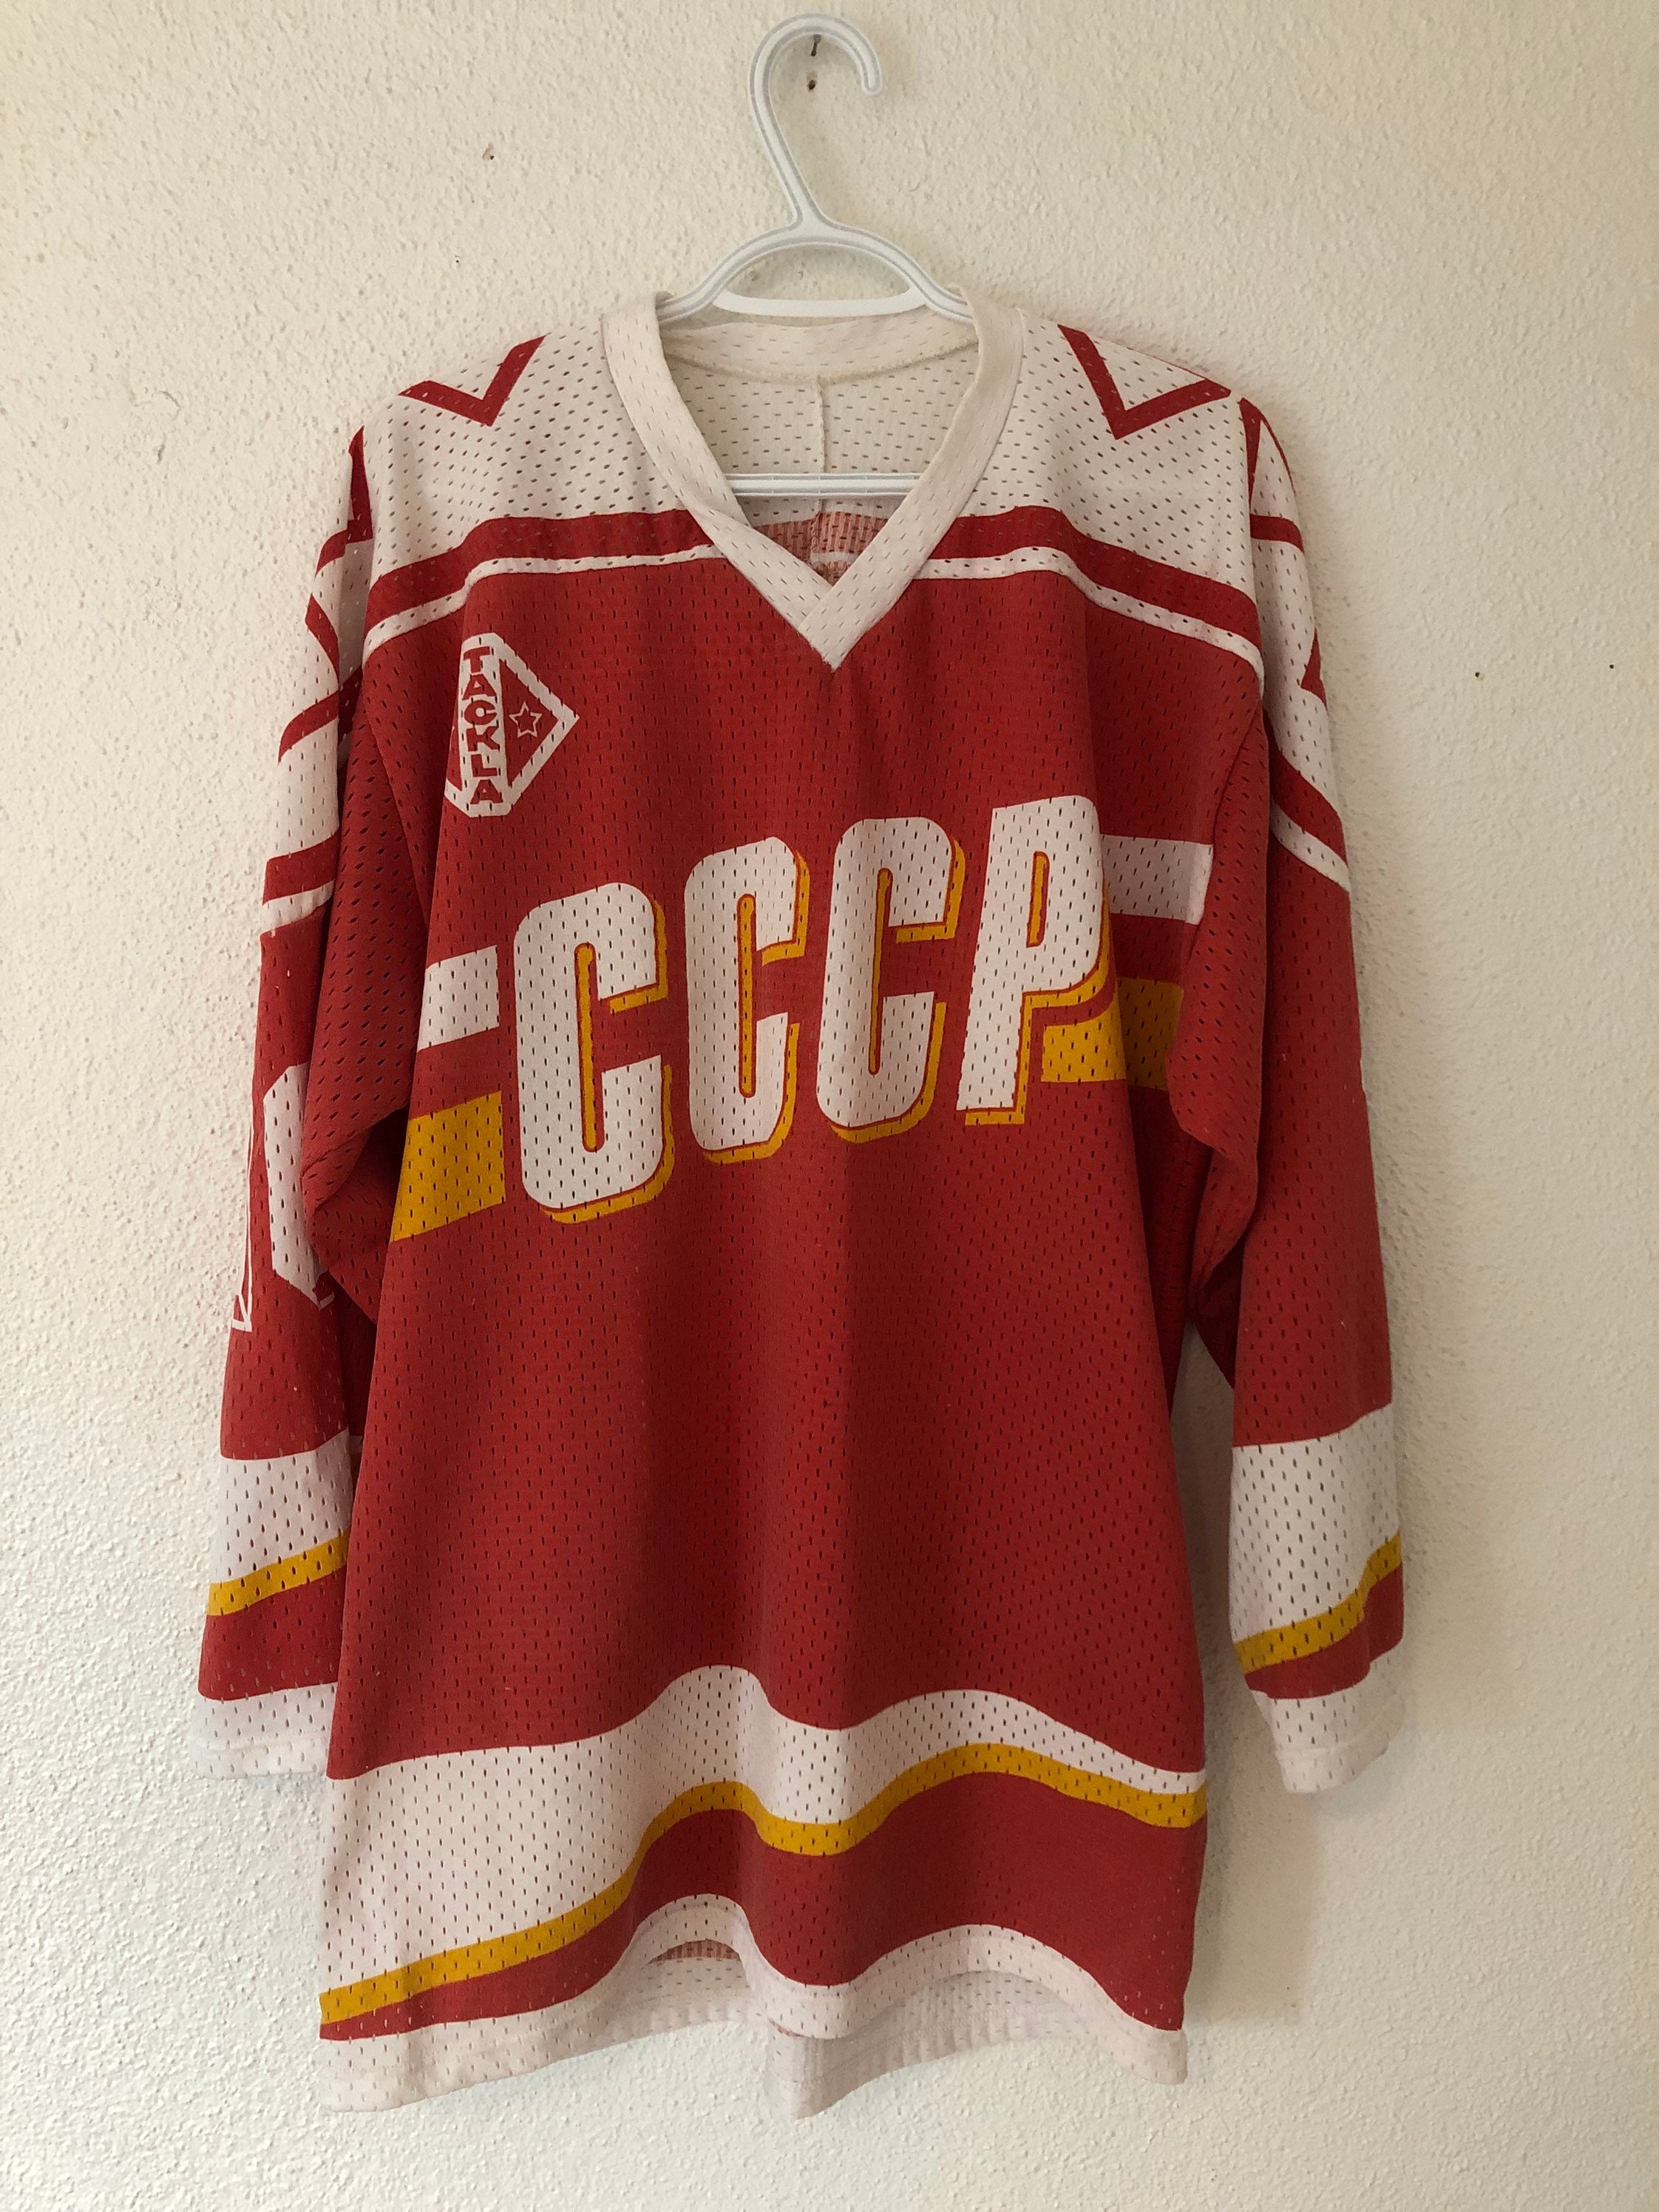 Pavel Bure Hockey Jersey CCCP Russia Sewed New In Any Size